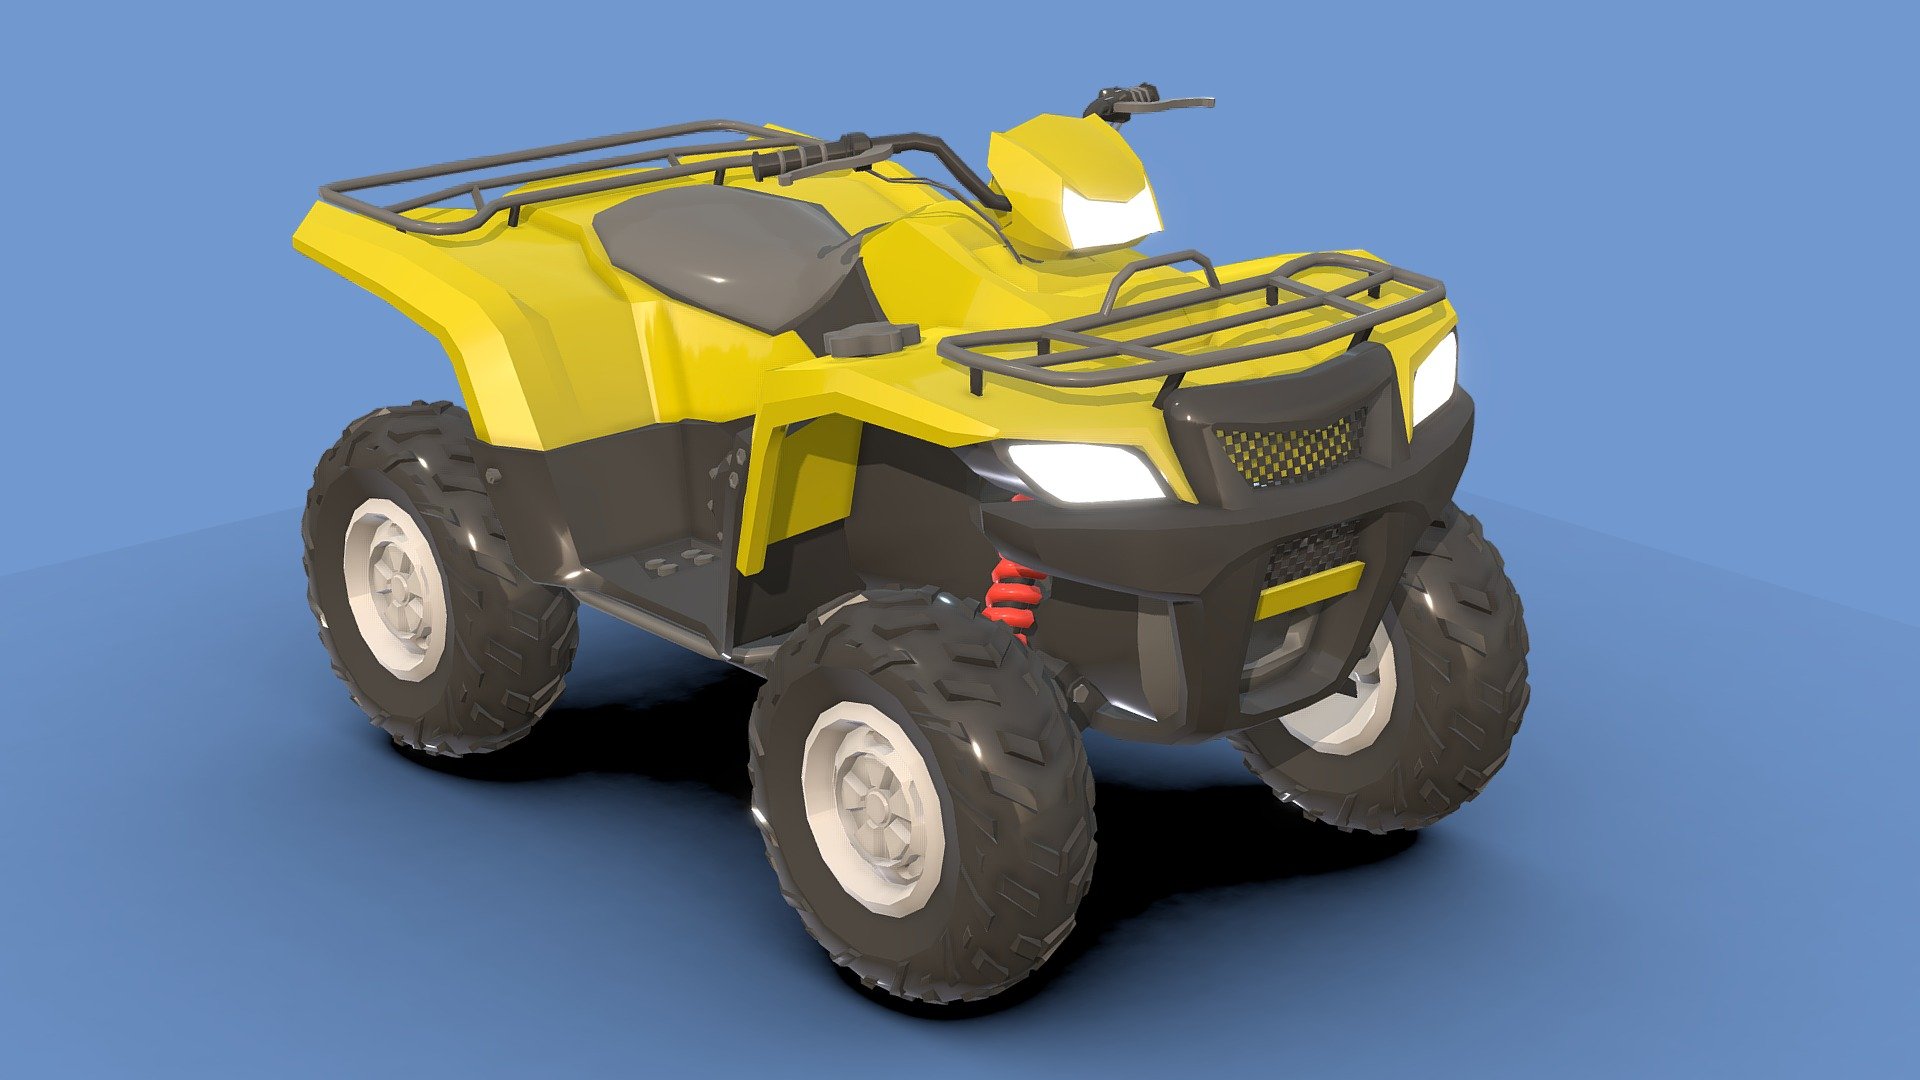 Low-Poly Quad bike 2 .

You can use these models in any game and project.

This model is made with order and precision.

The color of the body and wheels can be changed.

Separated parts (body_wheel steer).

Very low poly.

Average poly count: 22/000 Tris.

Texture size: 128/256 (PNG).

Number of textures: 2.

Number of materials: 2.

Format: fbx, obj, 3d max 3d model